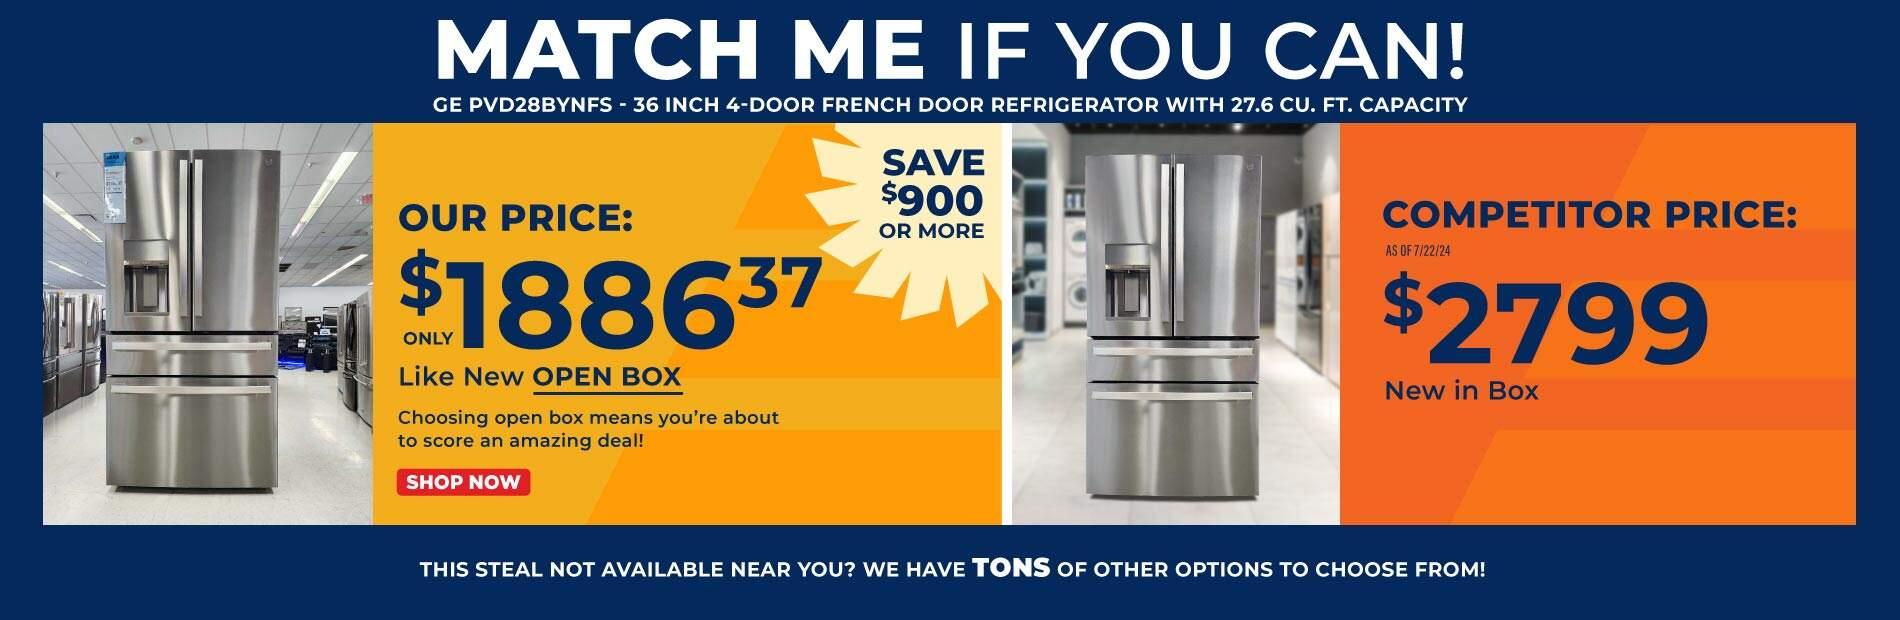 Match me if you can! GE PVD28BYNFS-36 Inch 4-door French Door Refrigerator with 27.6 CU. FT. Capacity. Our Price: Only $1886.37 Like New Open Box. Choosing open box means you're about to score an amazing deal! Save $700 or more! Competitor Price: As of 7/16/24 $2598 New in box. Shop Now. This steal not available near you? We have tons of other options to choose from!